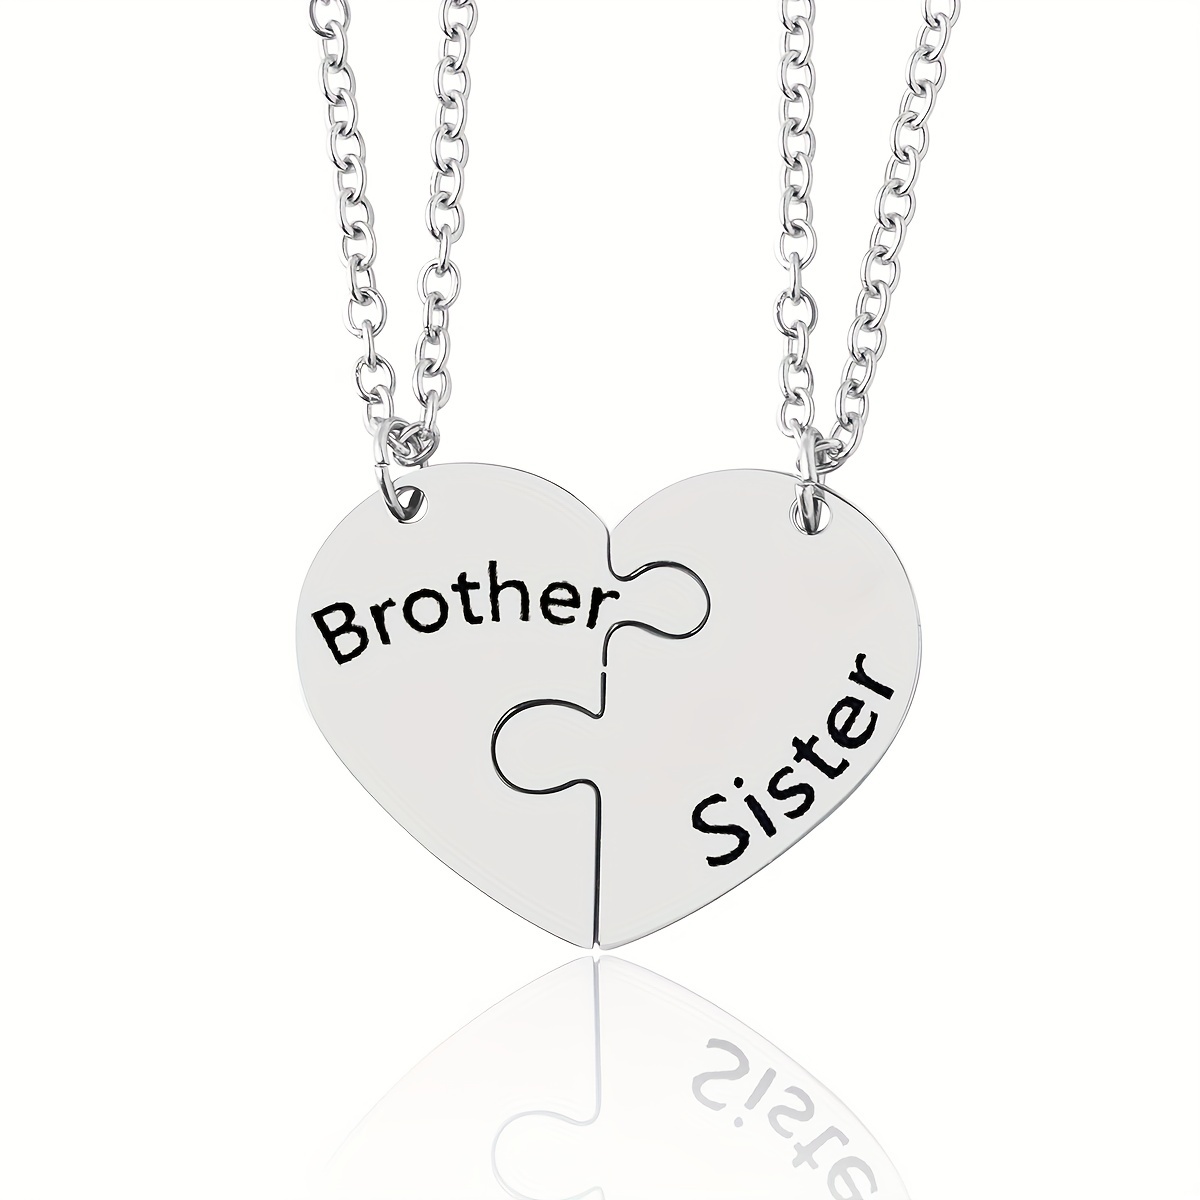 Brother Sister Bracelet Set, Brother Sister Gifts, Matching